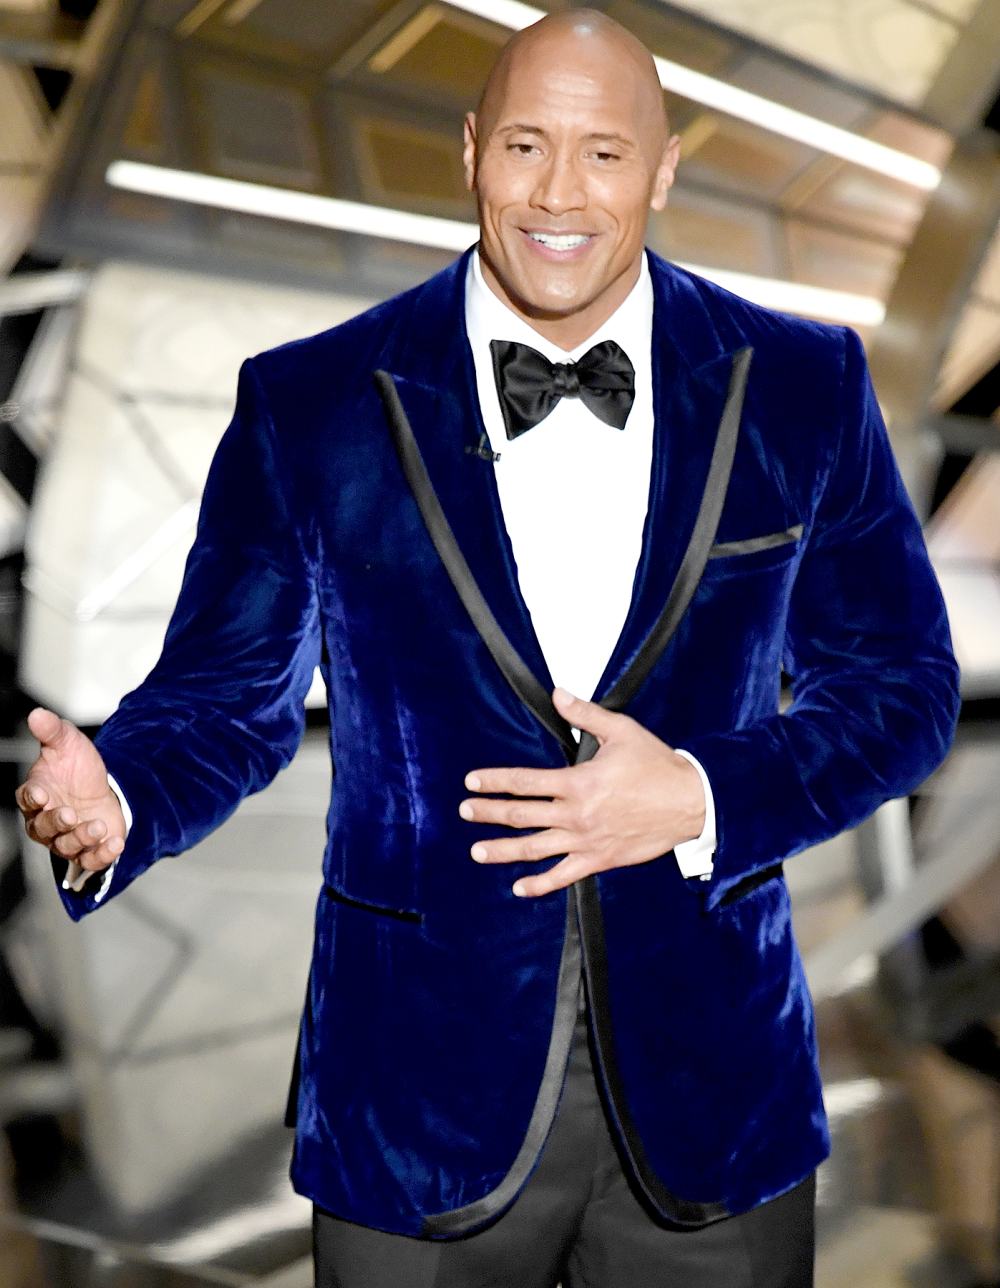 Dwayne Johnson speaks onstage during the 89th Annual Academy Awards at Hollywood & Highland Center on February 26, 2017 in Hollywood, California.